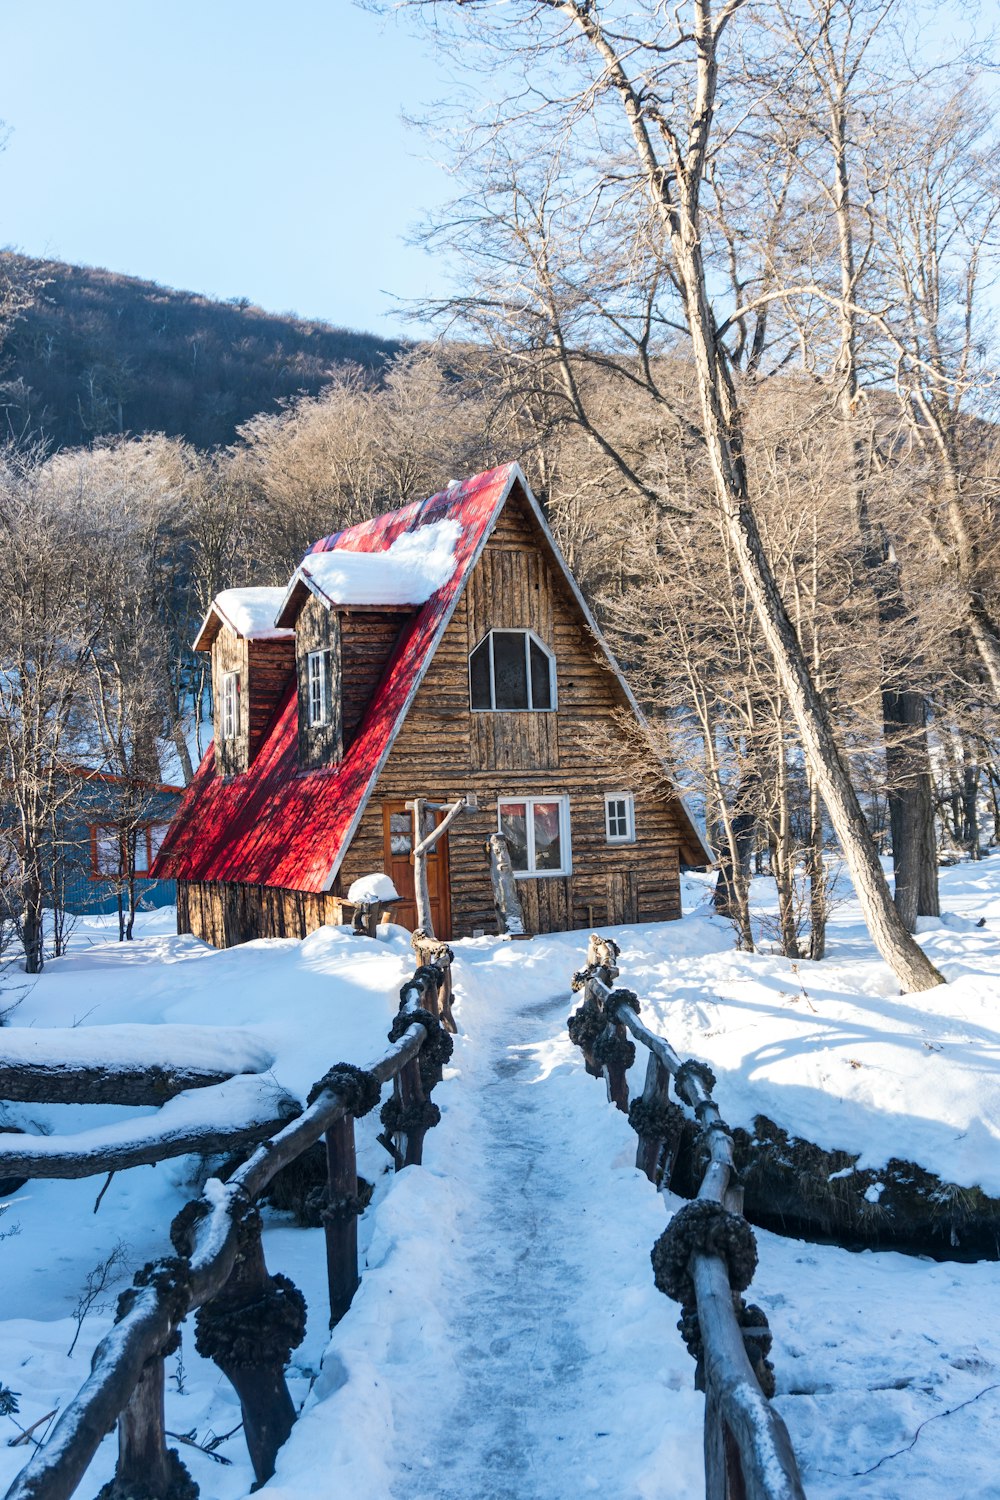 a wooden cabin with a red tarp on the roof